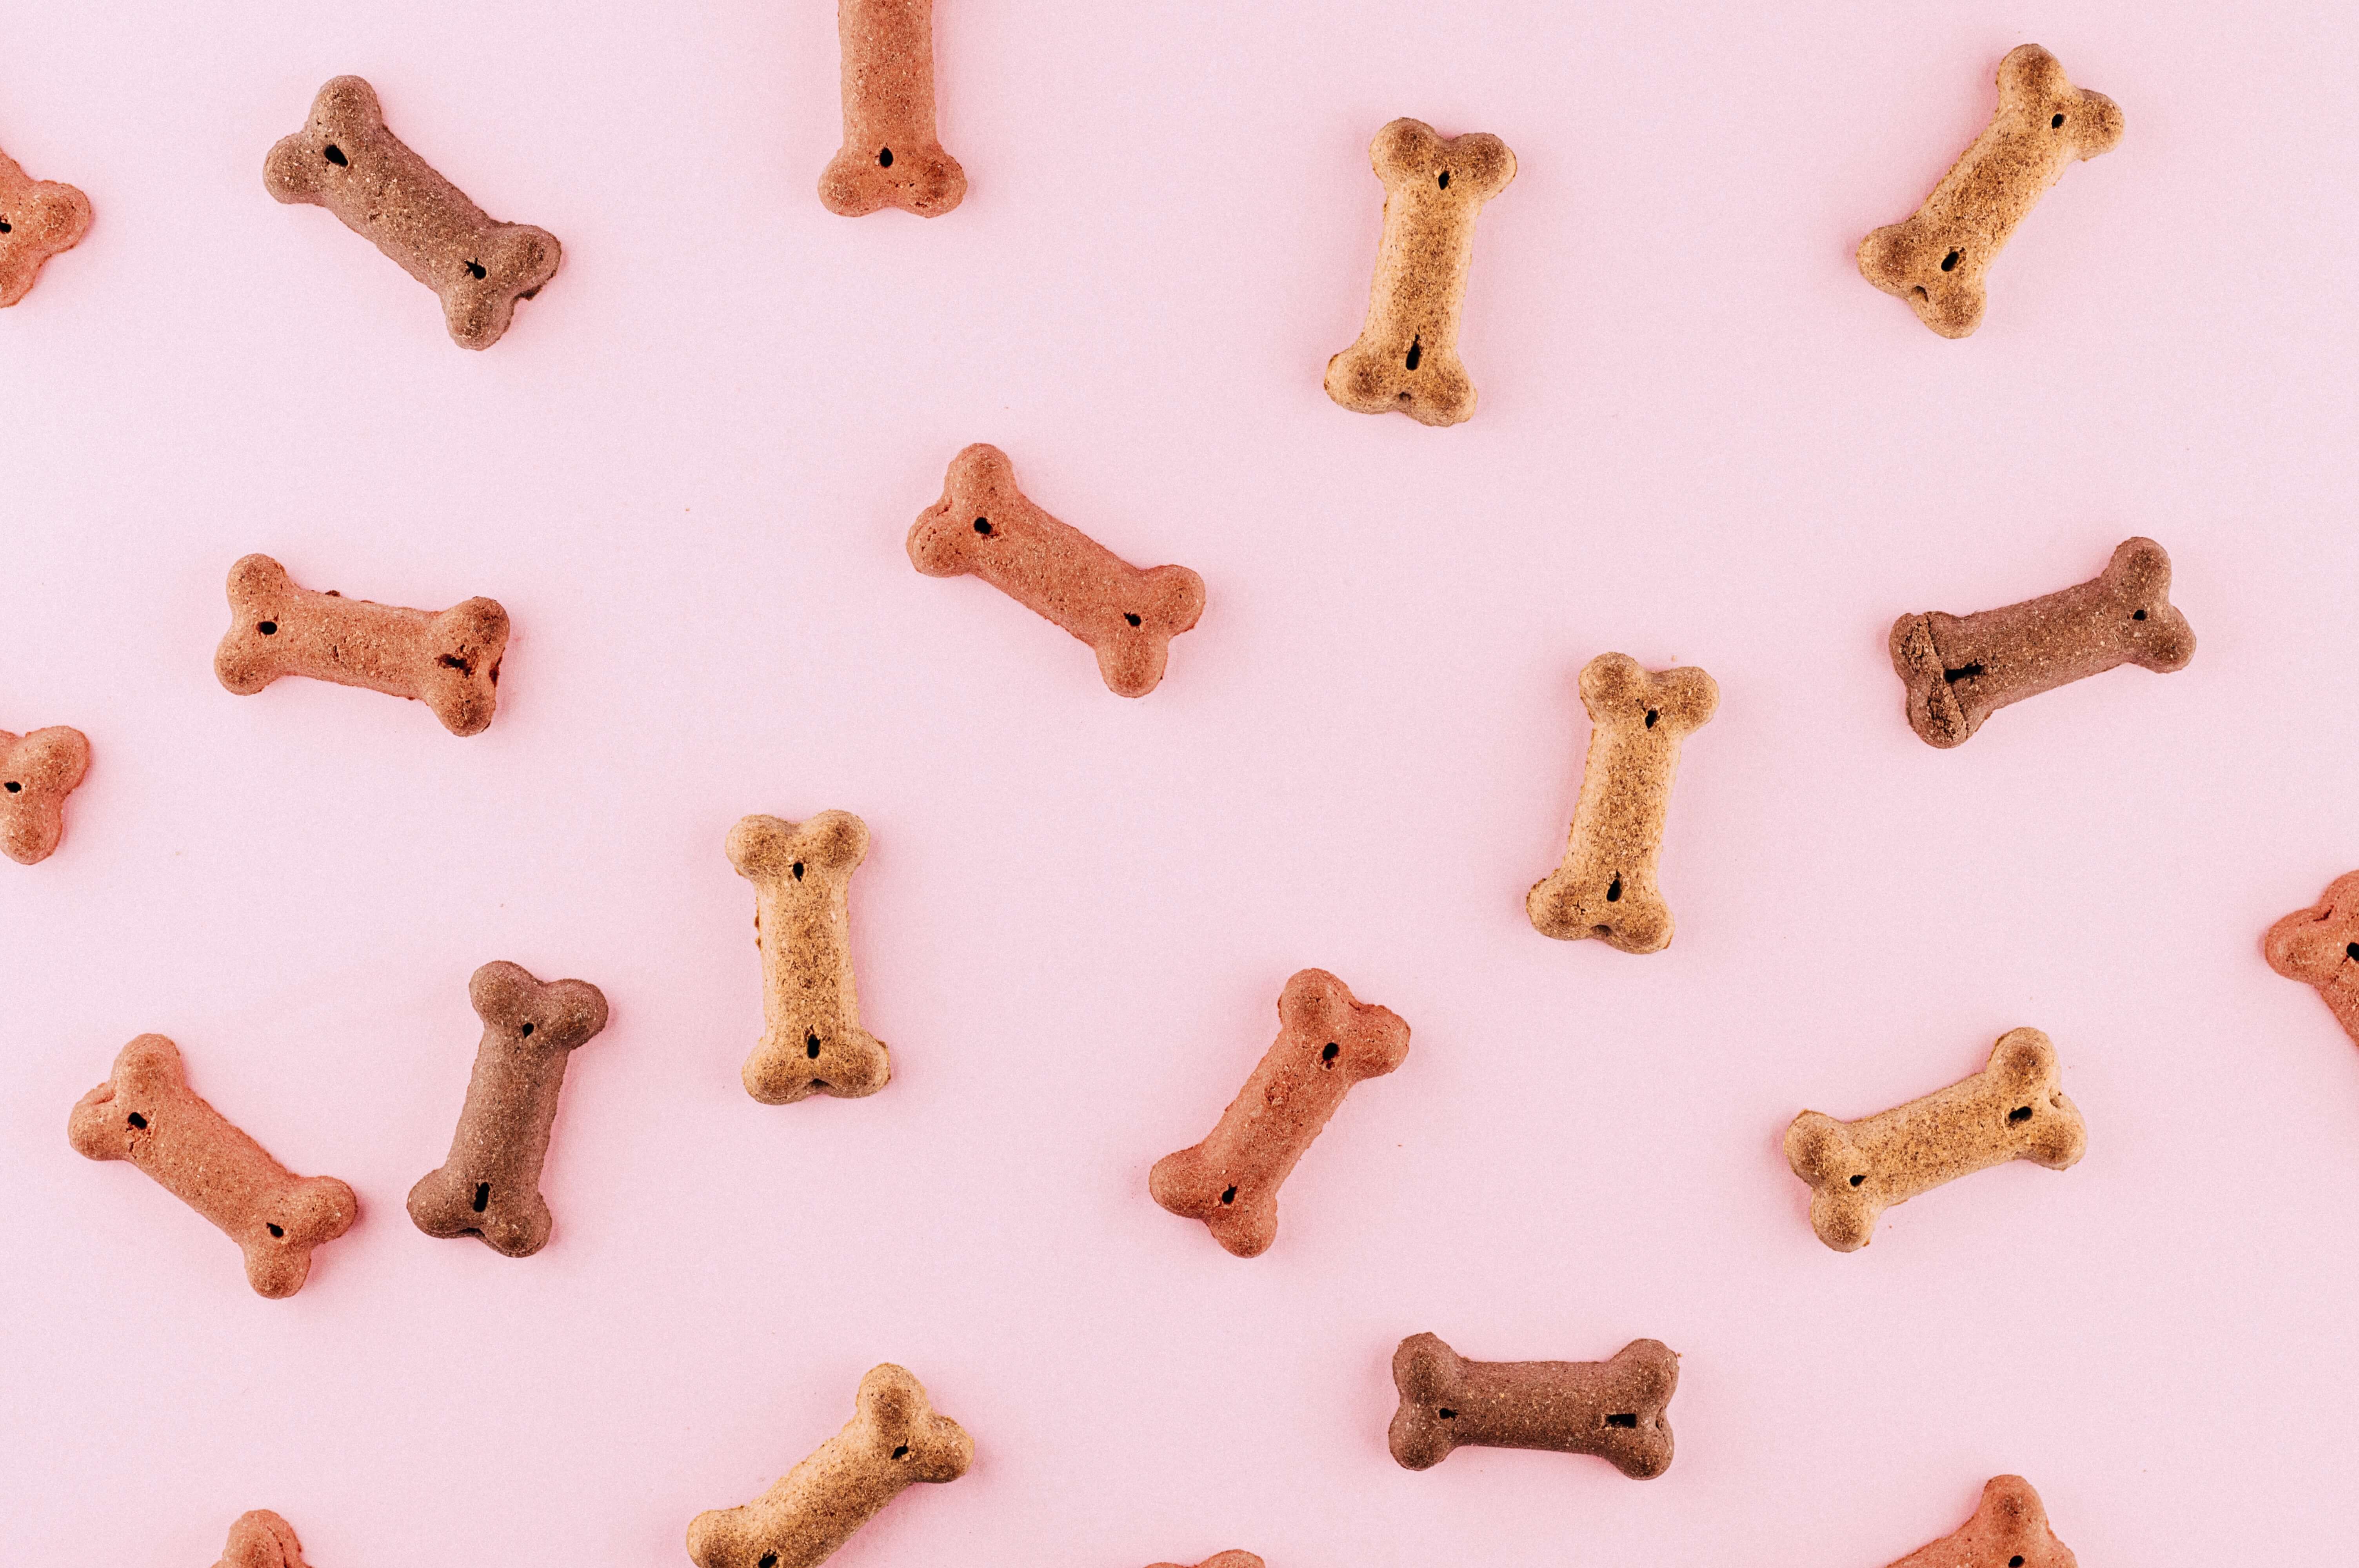 Dog biscuits on a pink background